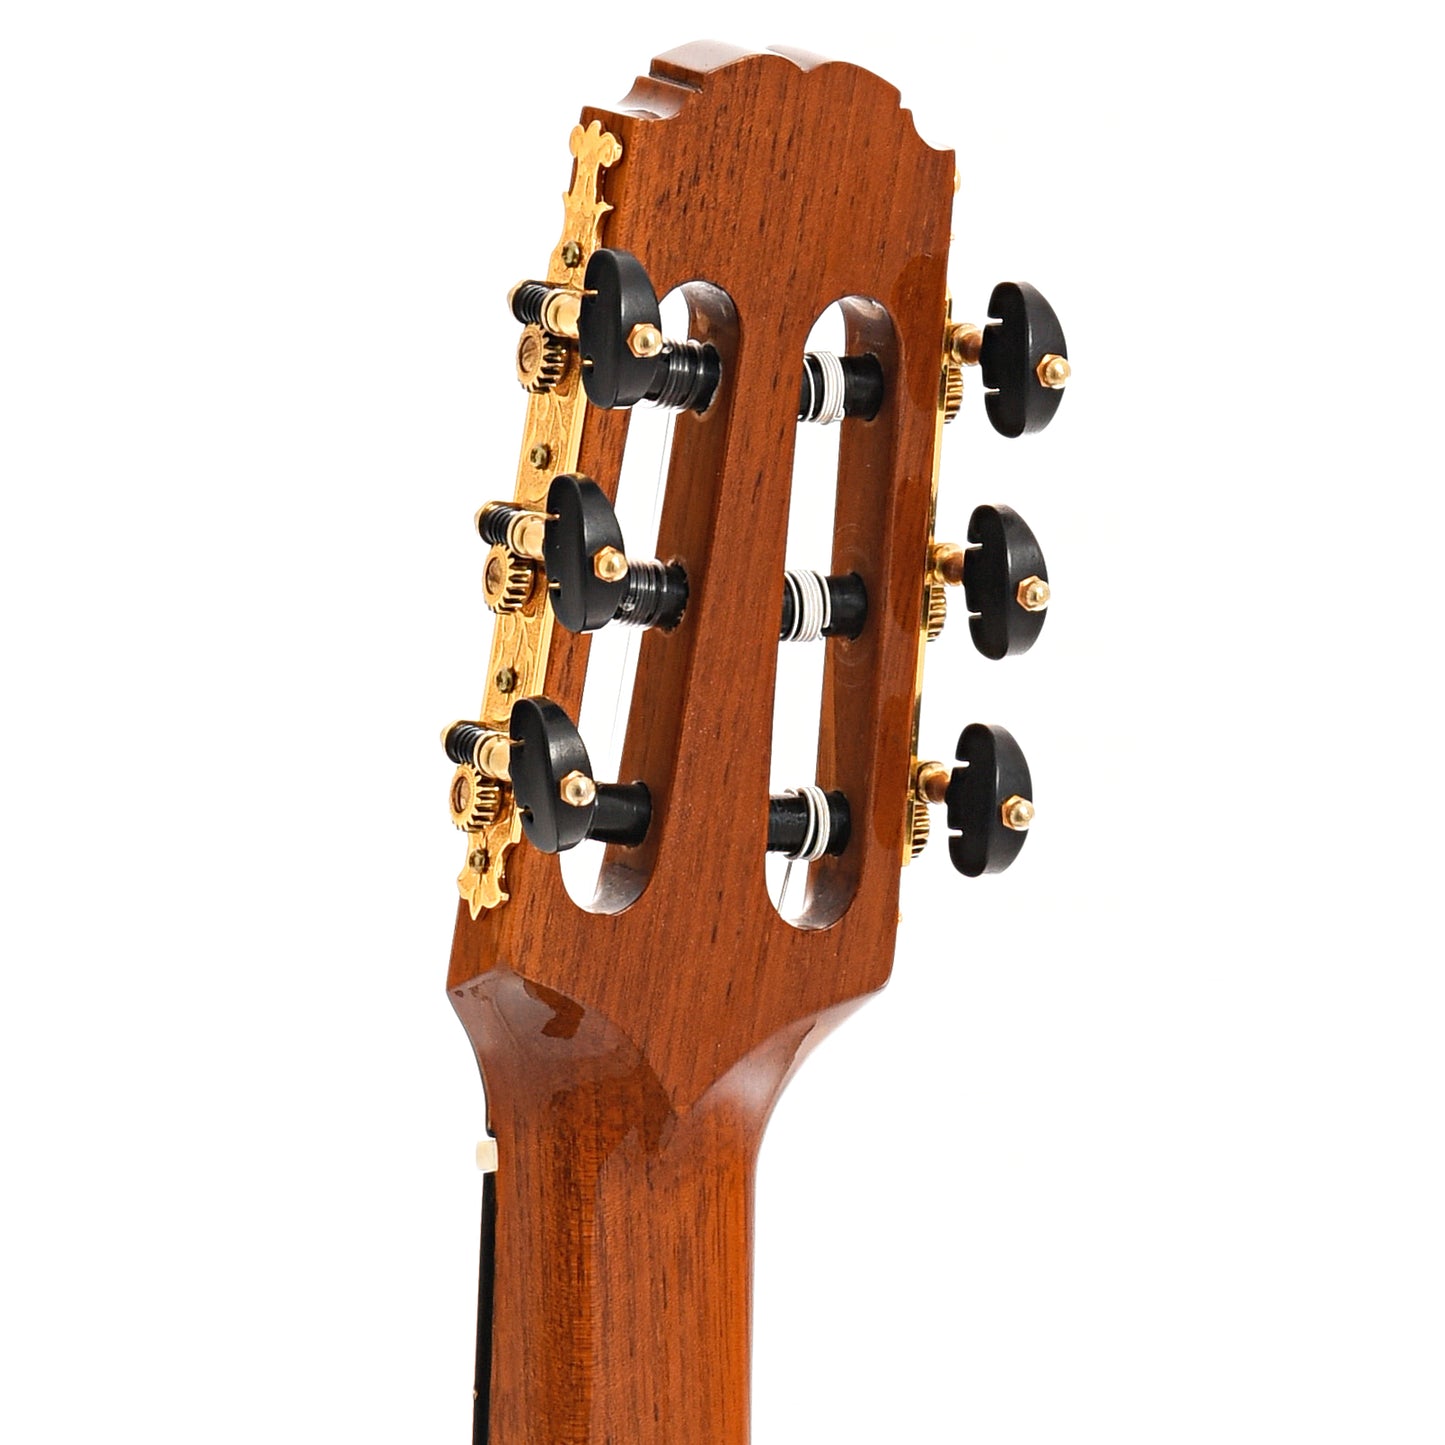 Back headstock of Cervantes Crossover 1 Classical Guitar